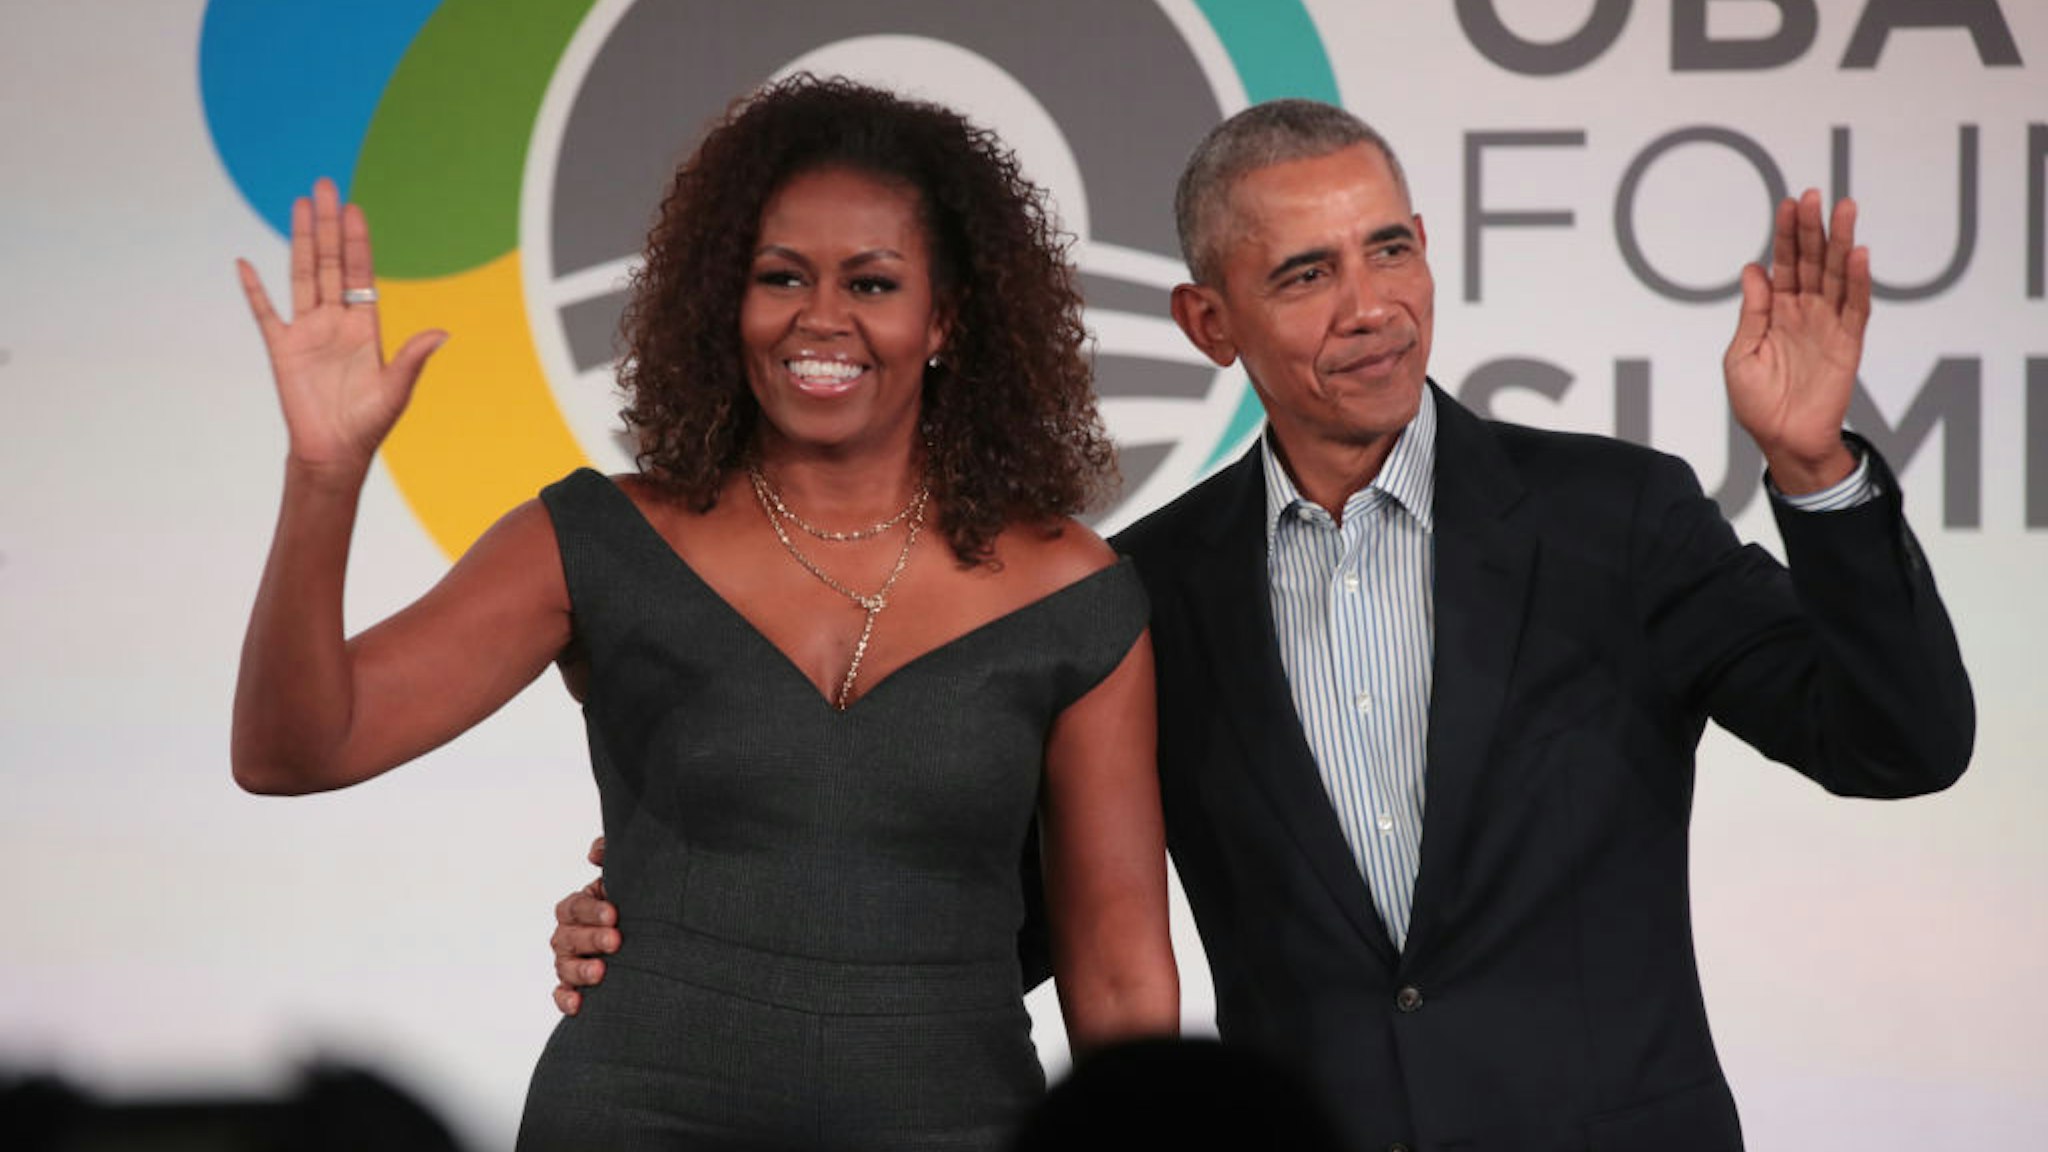 Former U.S. President Barack Obama and his wife Michelle close the Obama Foundation Summit together on the campus of the Illinois Institute of Technology on October 29, 2019 in Chicago, Illinois. The Summit is an annual event hosted by the Obama Foundation.